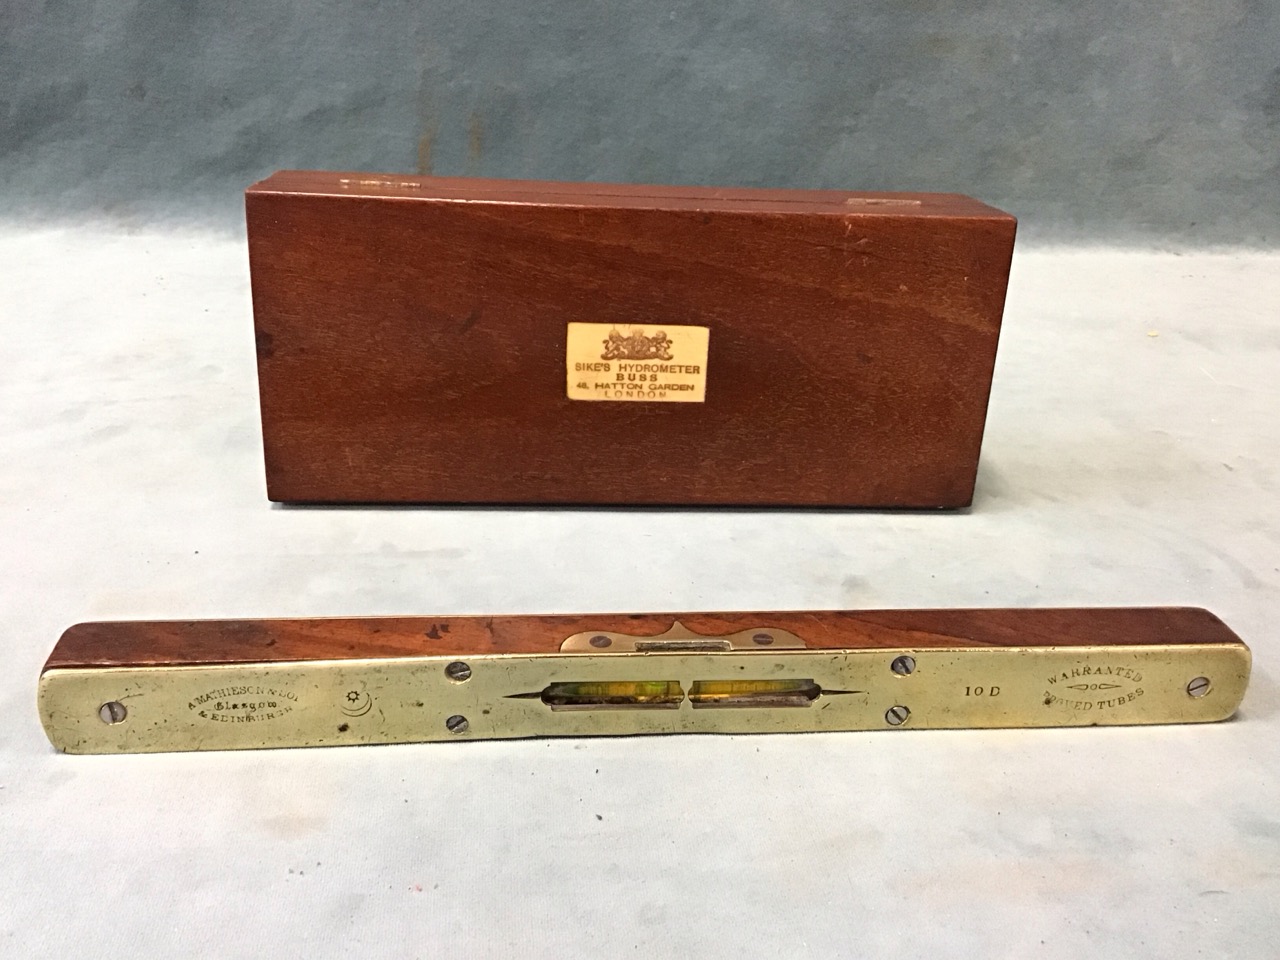 A Victorian mahogany cased brass hygrometer with weights & bone thermometer by Buss of London - 9. - Image 2 of 3